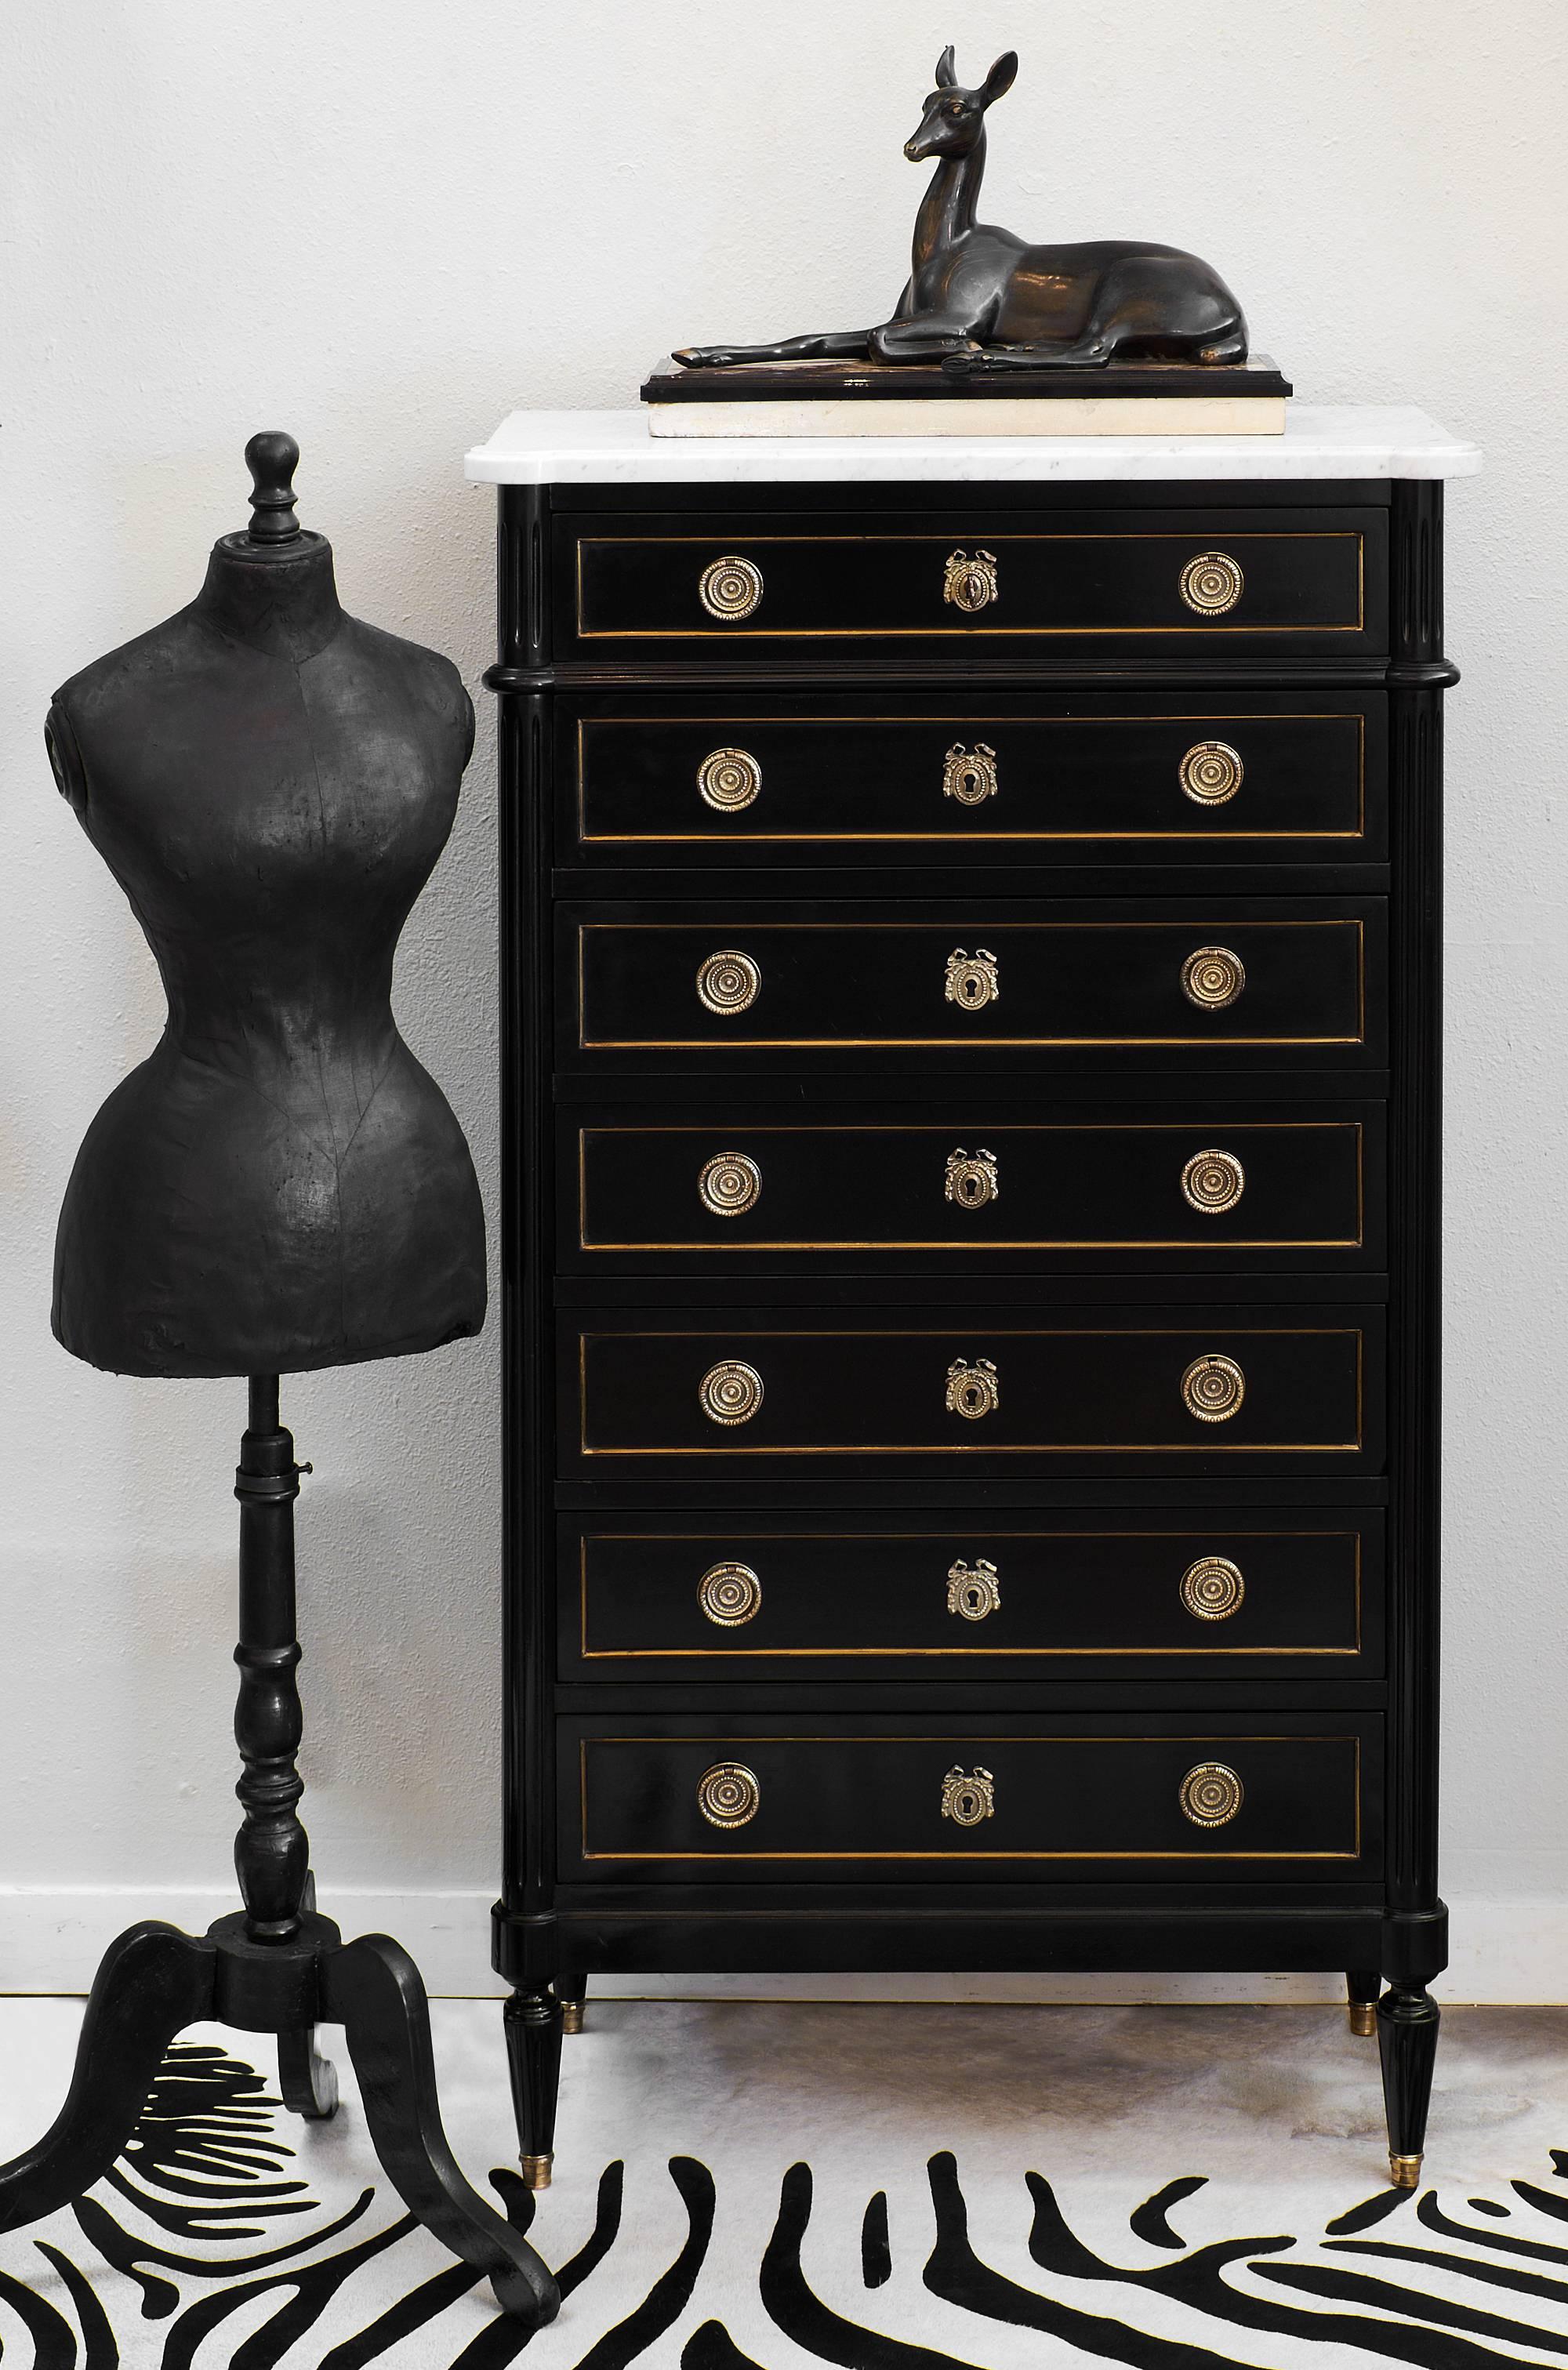 Mahogany Louis XVI style semainier from 1920. This piece is the epitome of chic! With seven drawers, a drawer per day of the week (La Semaine means week in French) this bold and sophisticated piece catches the eye. It has a lustrous French polish